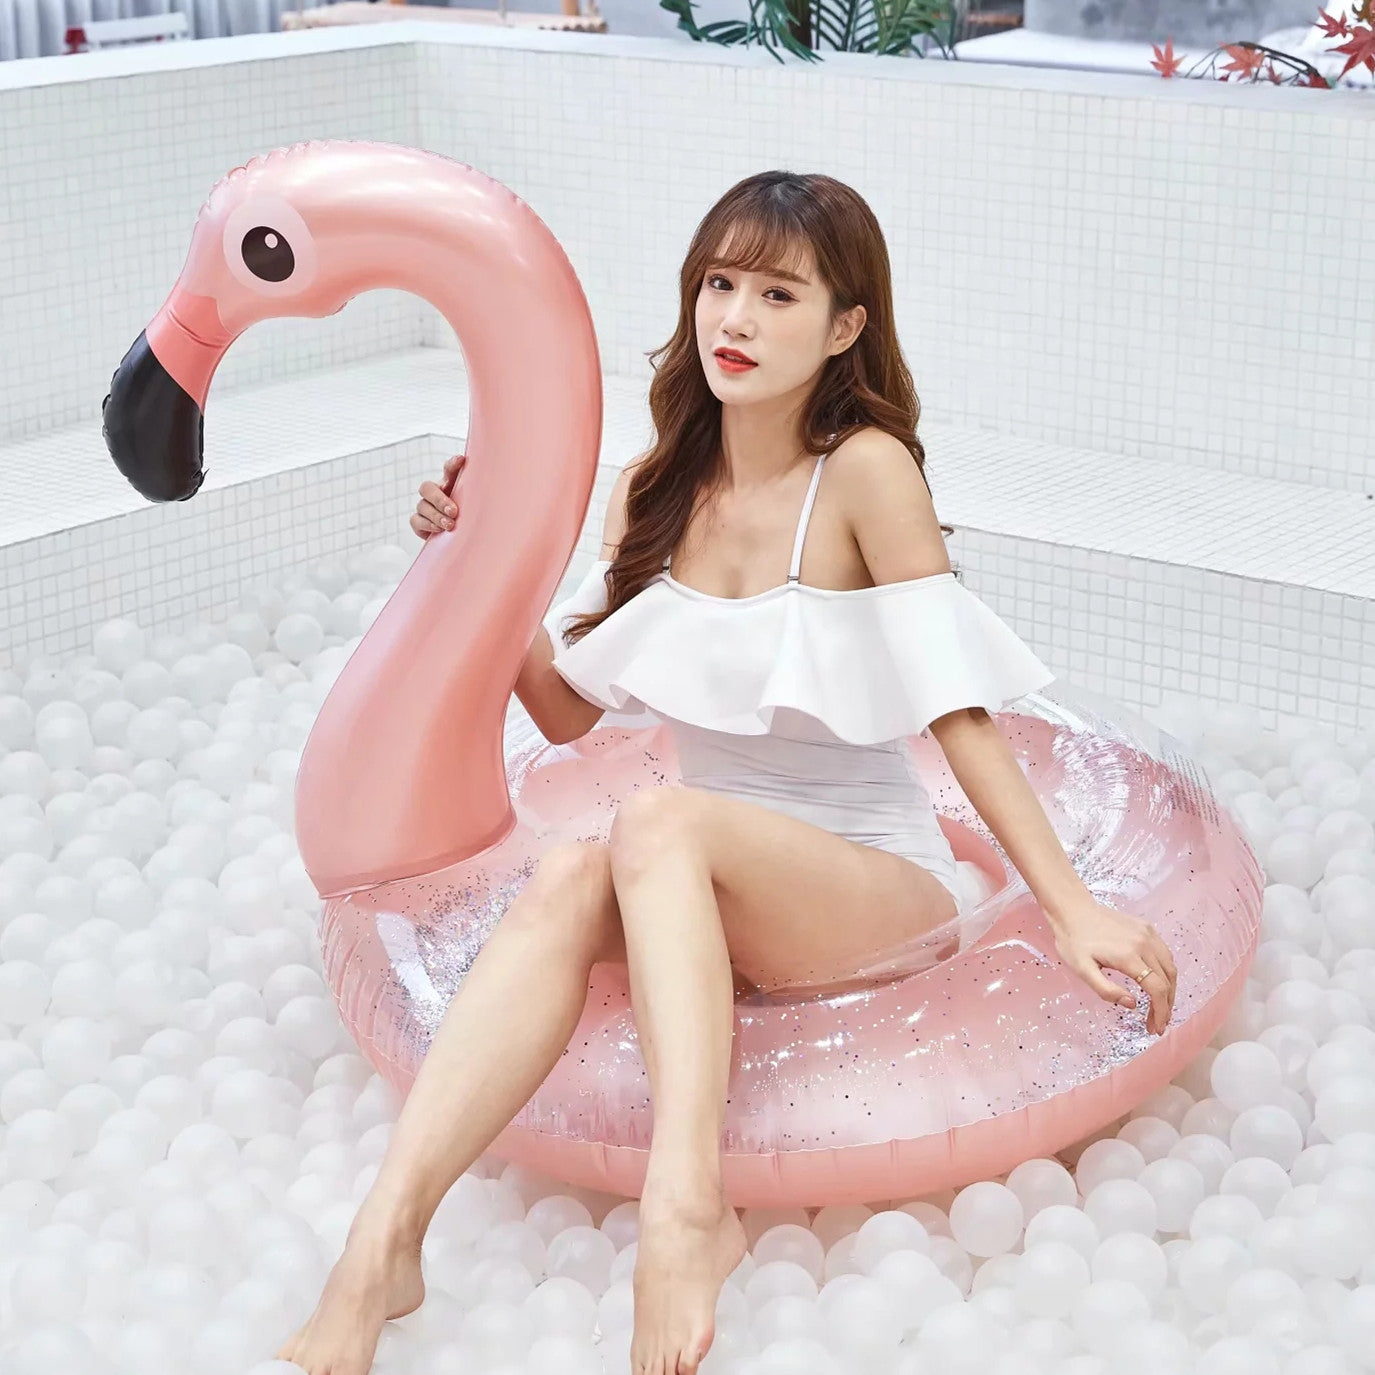 Load image into Gallery viewer, Flamingo Glitter Ring - Inflatable | Inflatables | PARADIS SVP
